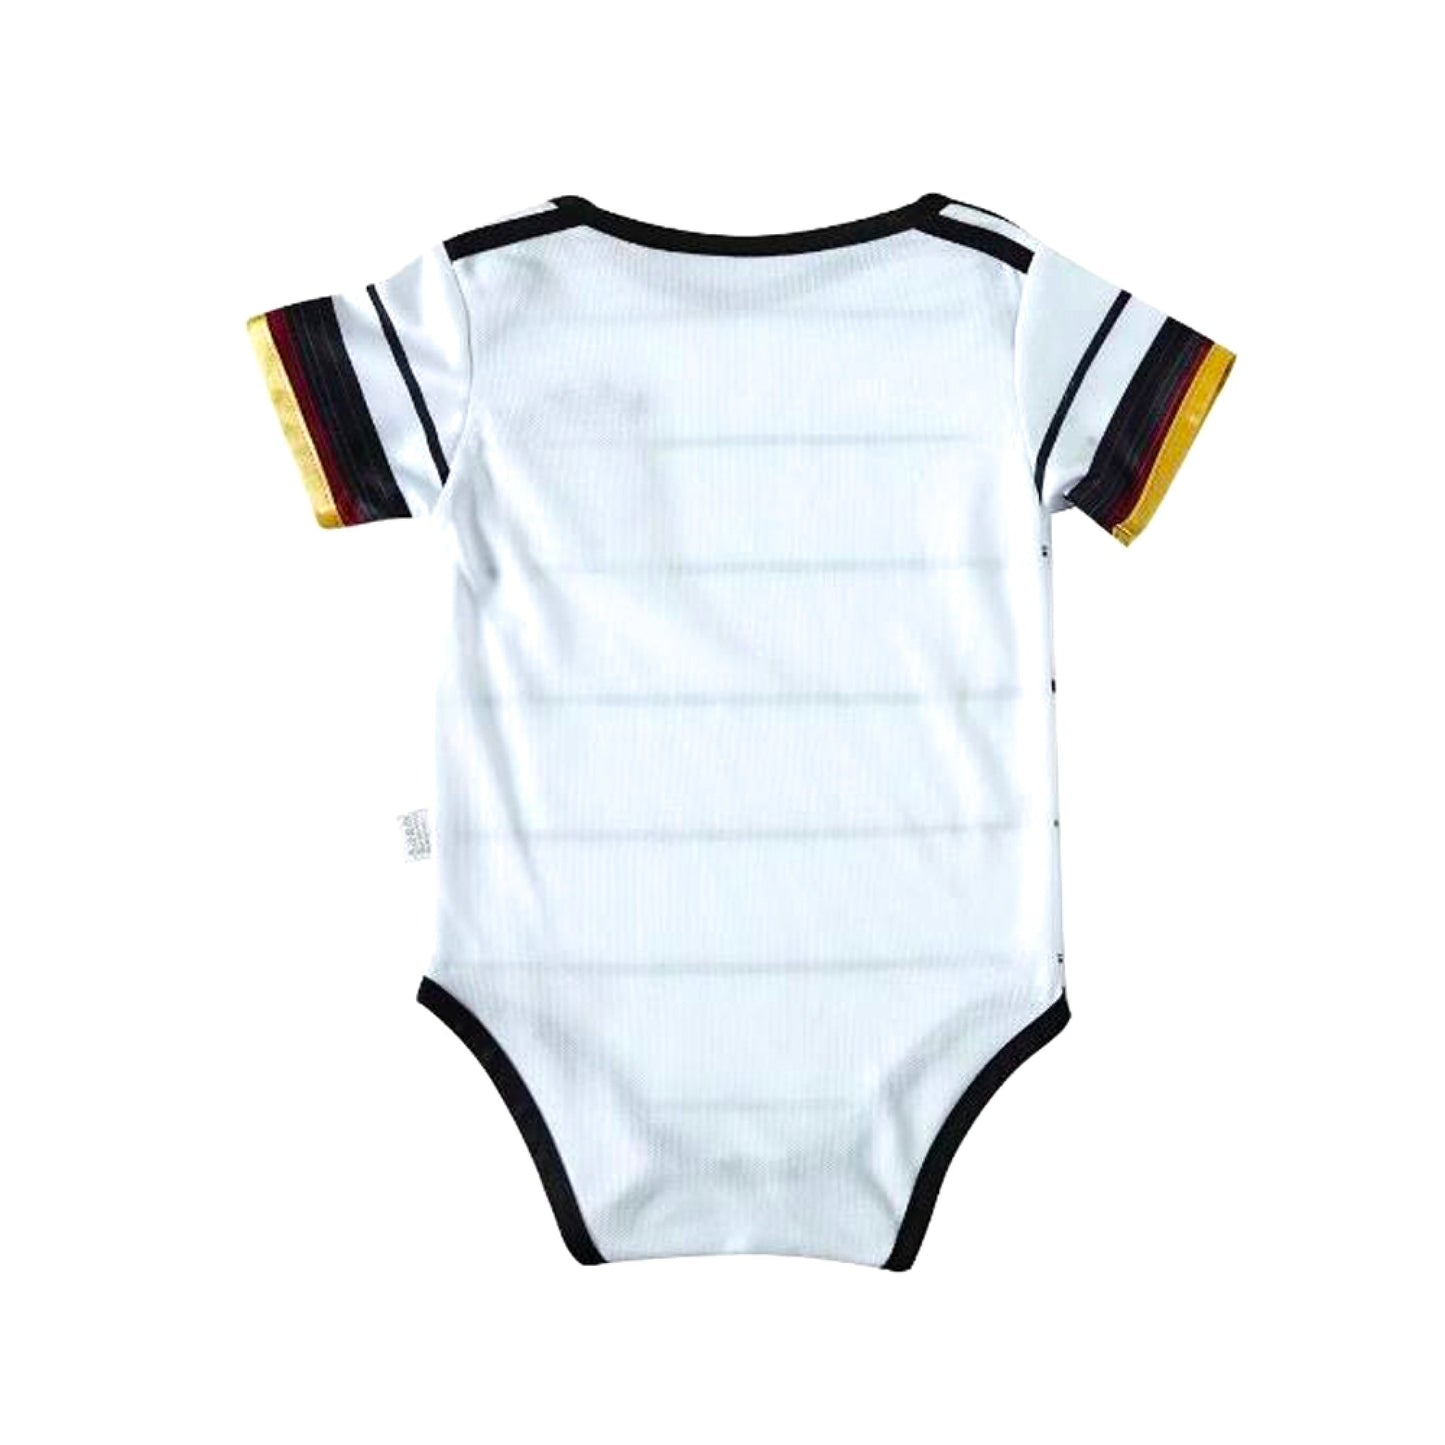 Germany Home Baby Jersey 2020 - Mitani Store